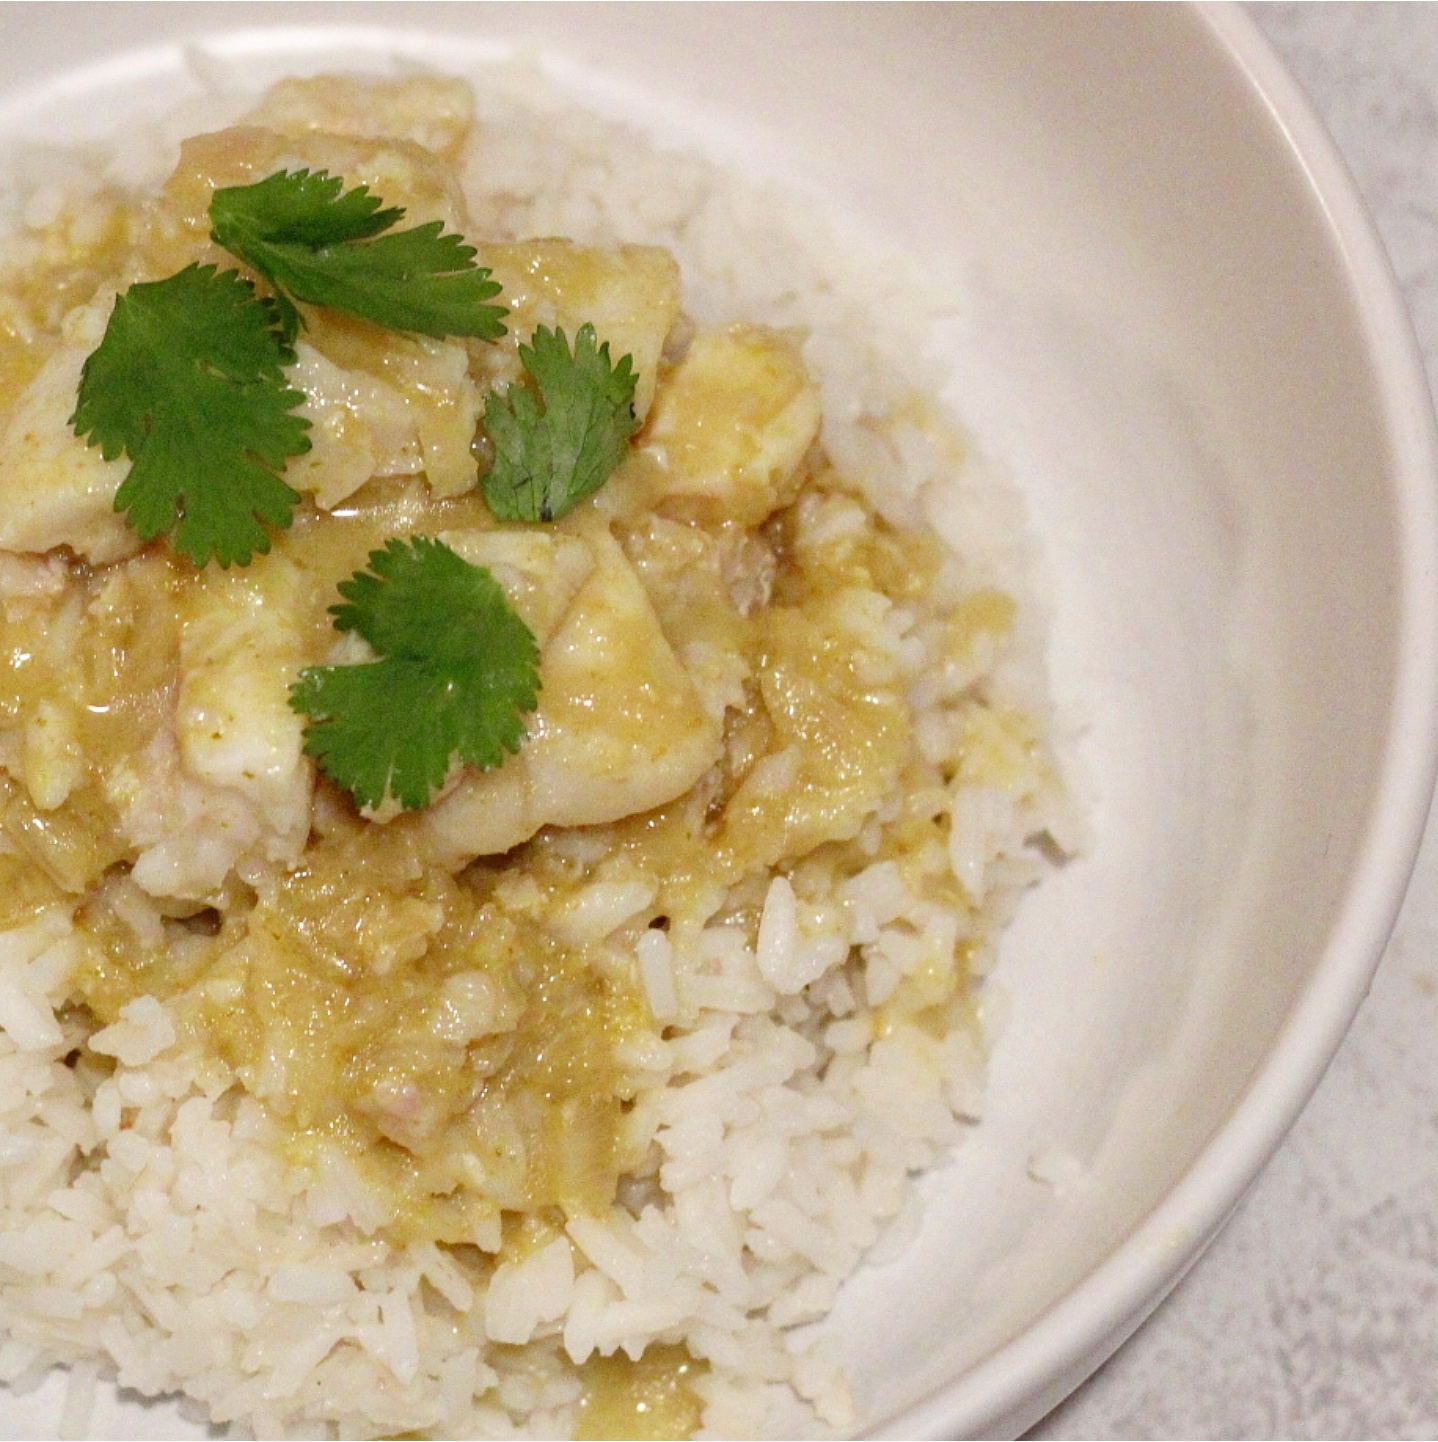 From My Kitchen: Green Thai Curry Flounder